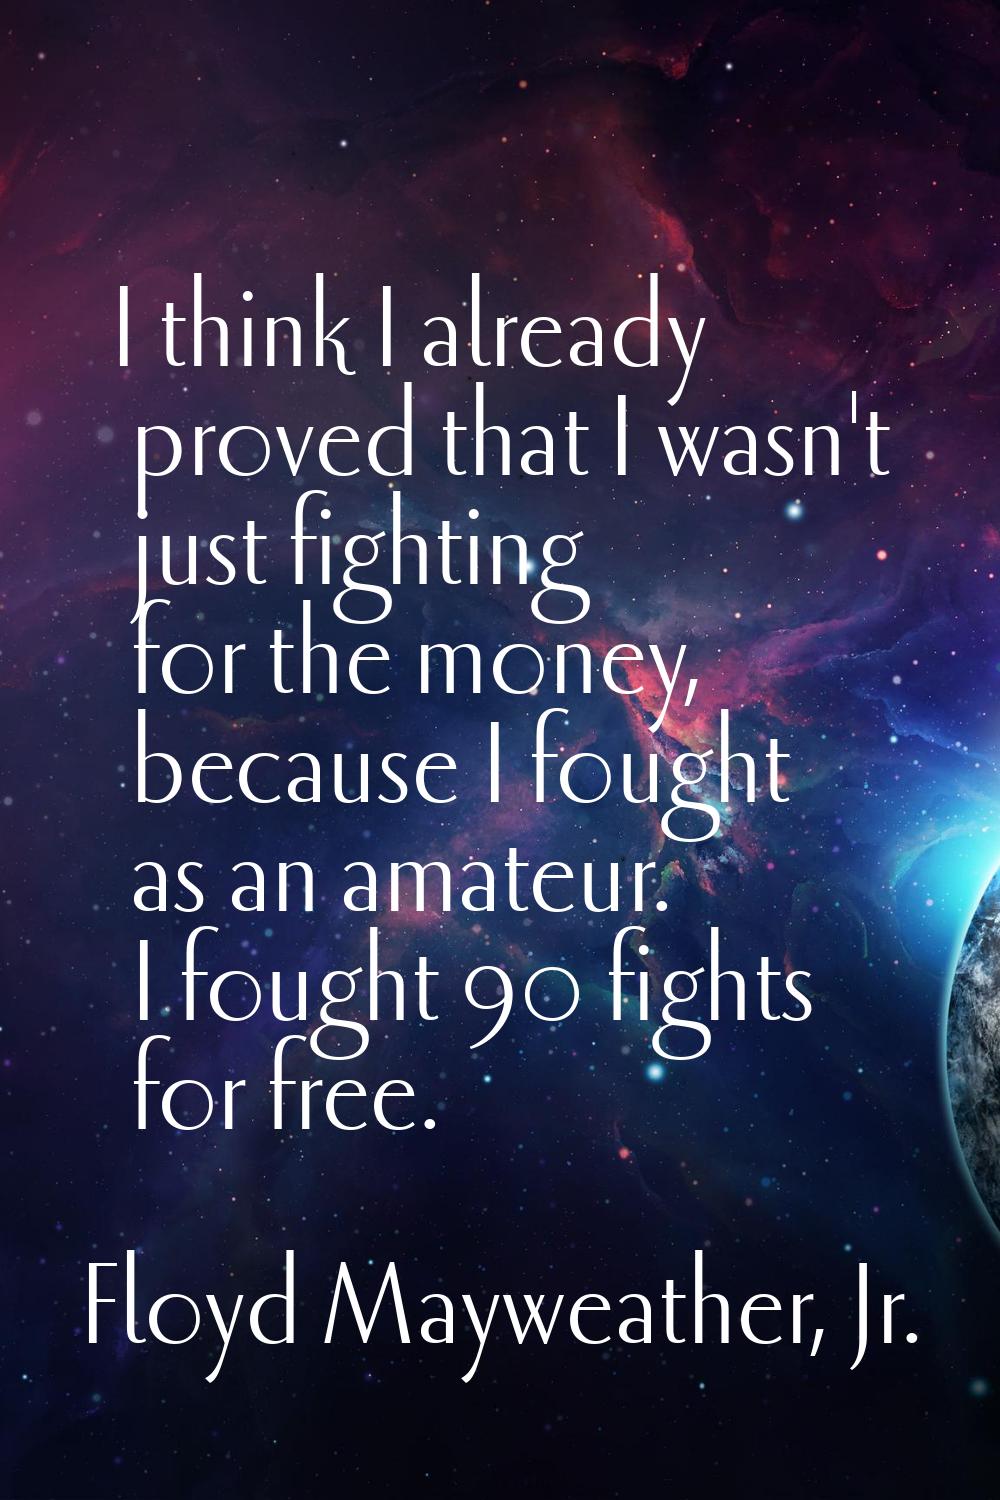 I think I already proved that I wasn't just fighting for the money, because I fought as an amateur.